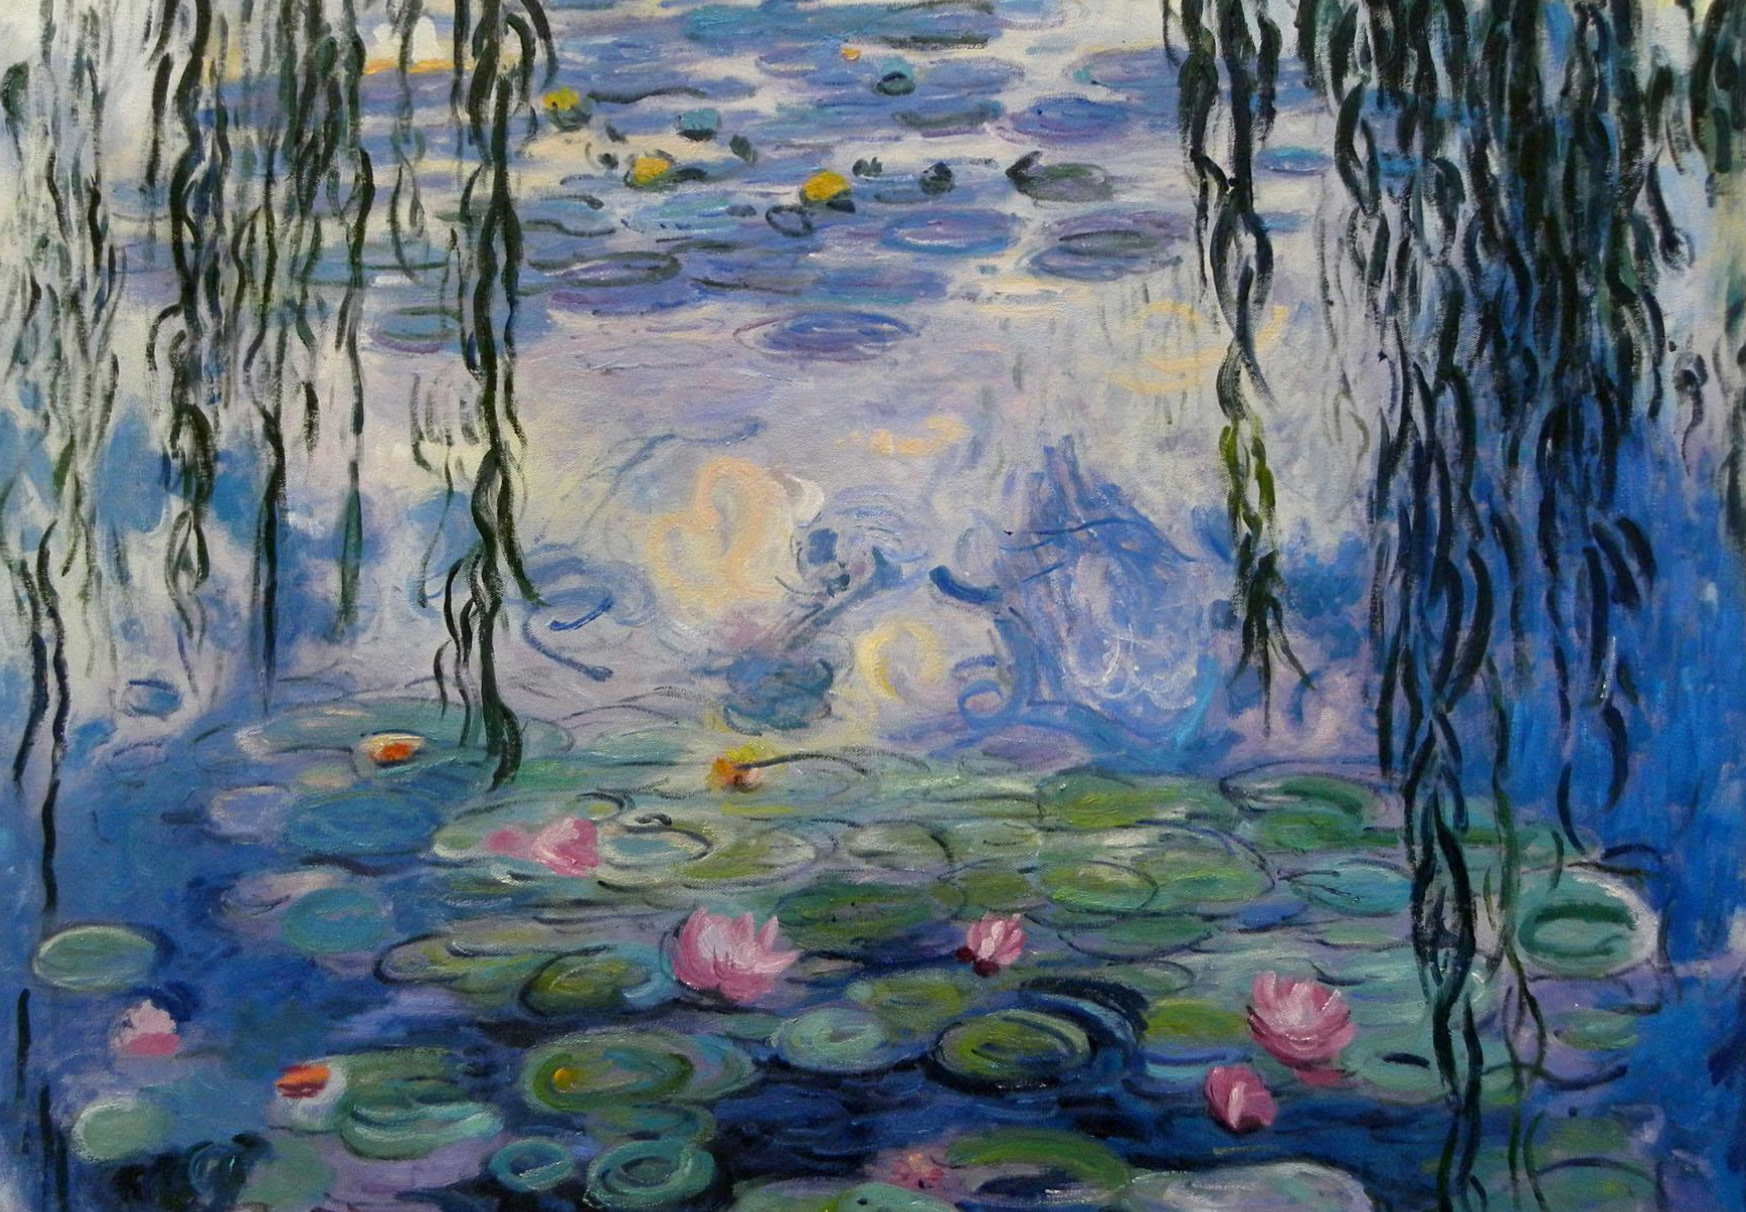 Water Lillies painting collection by Claude Monet